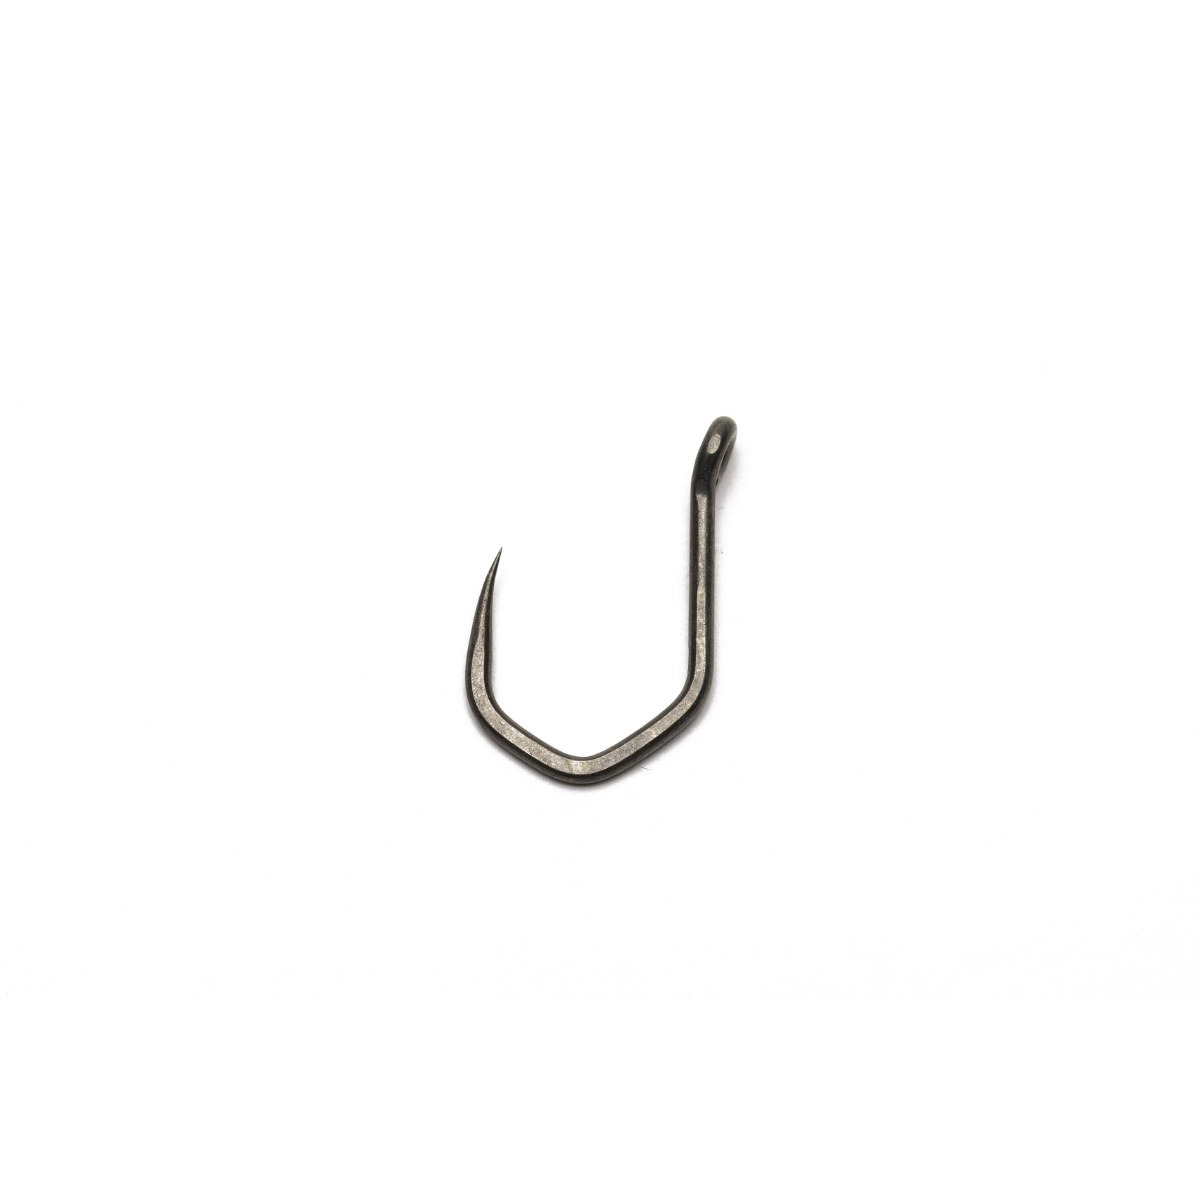 Nash Chod Claw - Size 8 Barbless